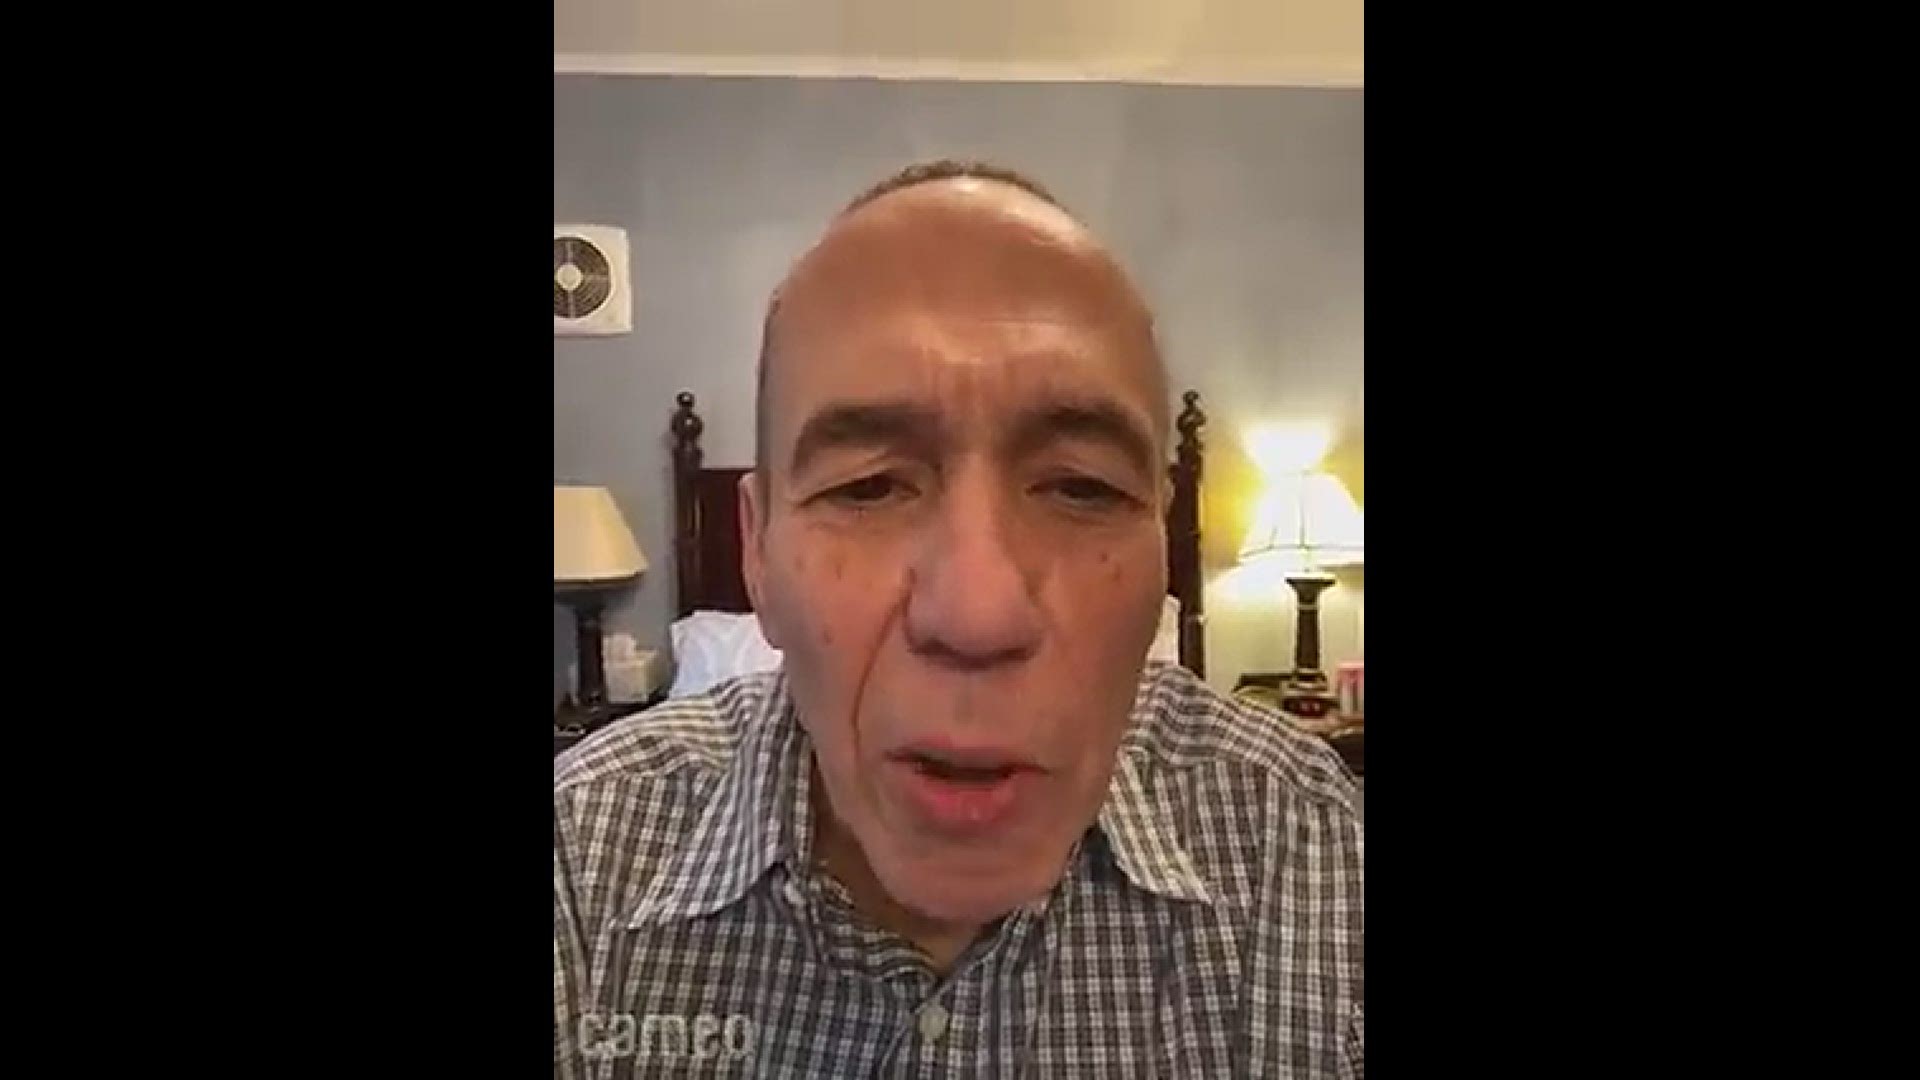 St. Clair County releases video of Gilbert Gottfried to encourage more people to get COVID vaccines at Belle-Clair Fairgrounds before site closes.